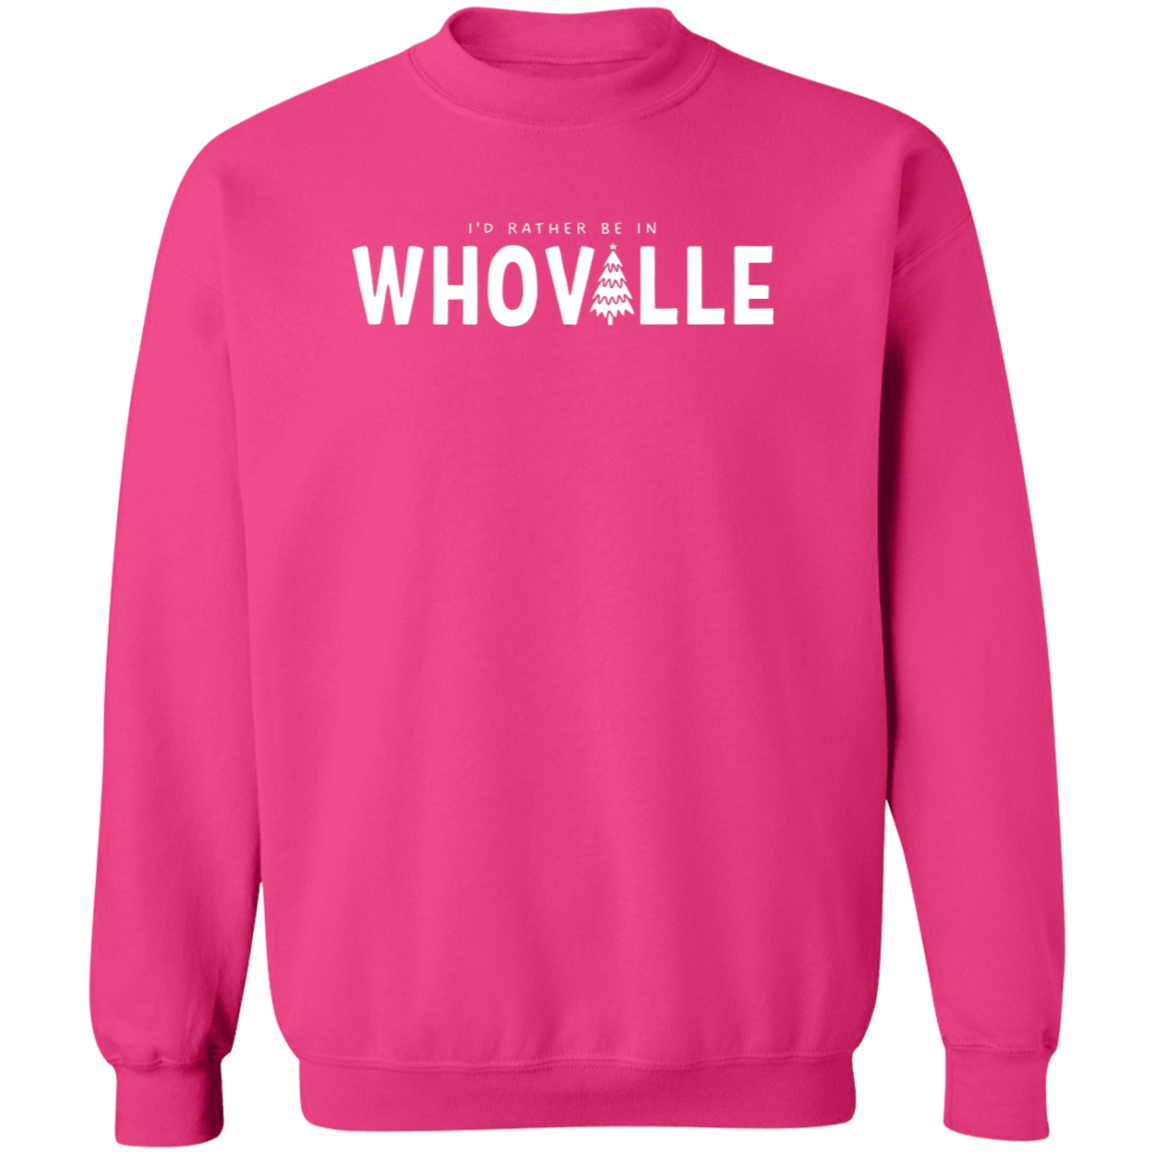 I'd Rather Be In Whoville Sweatshirt